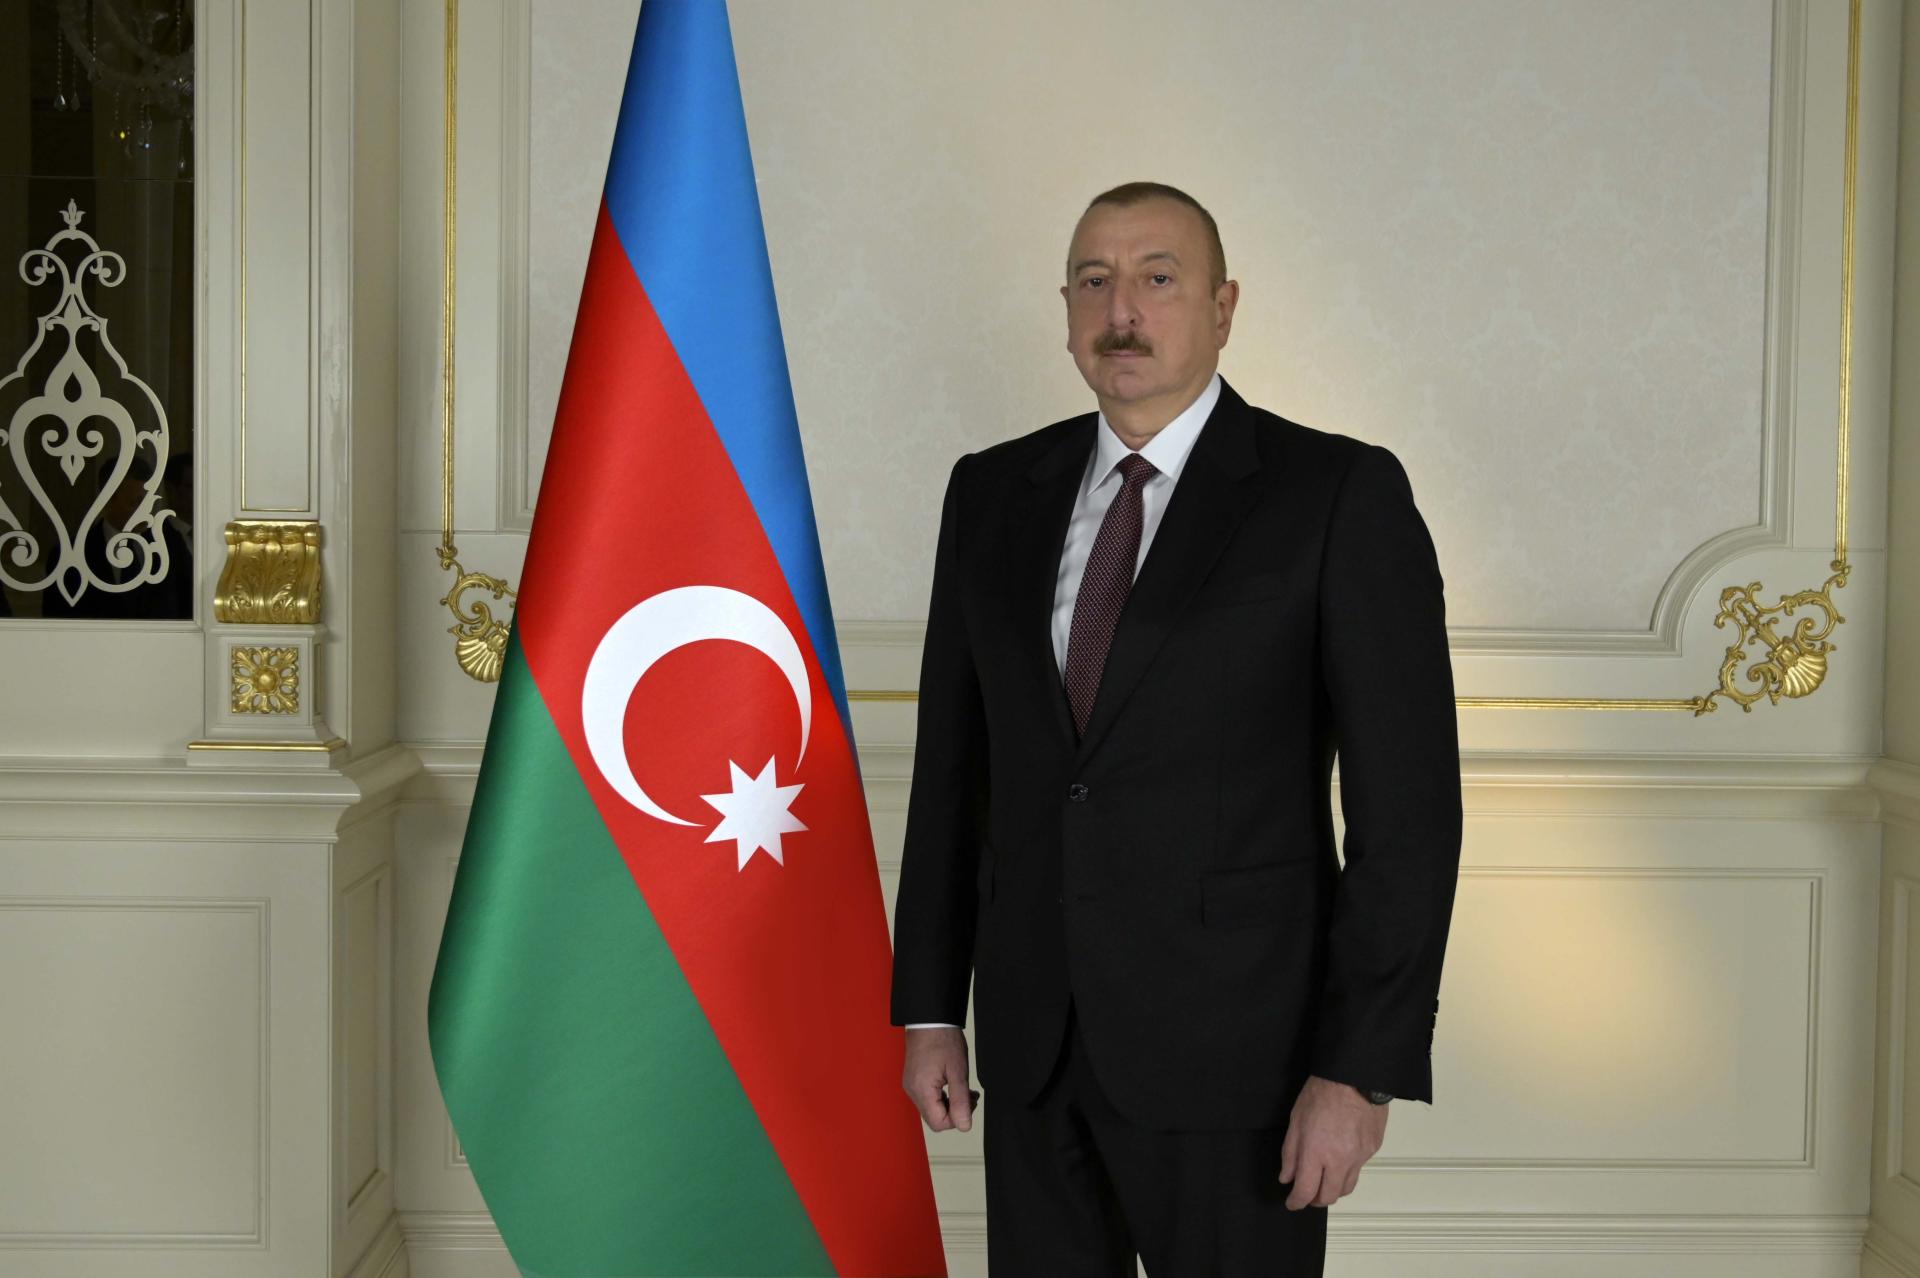 Video footage on occasion of Novruz holiday posted on Azerbaijani president’s official Facebook page